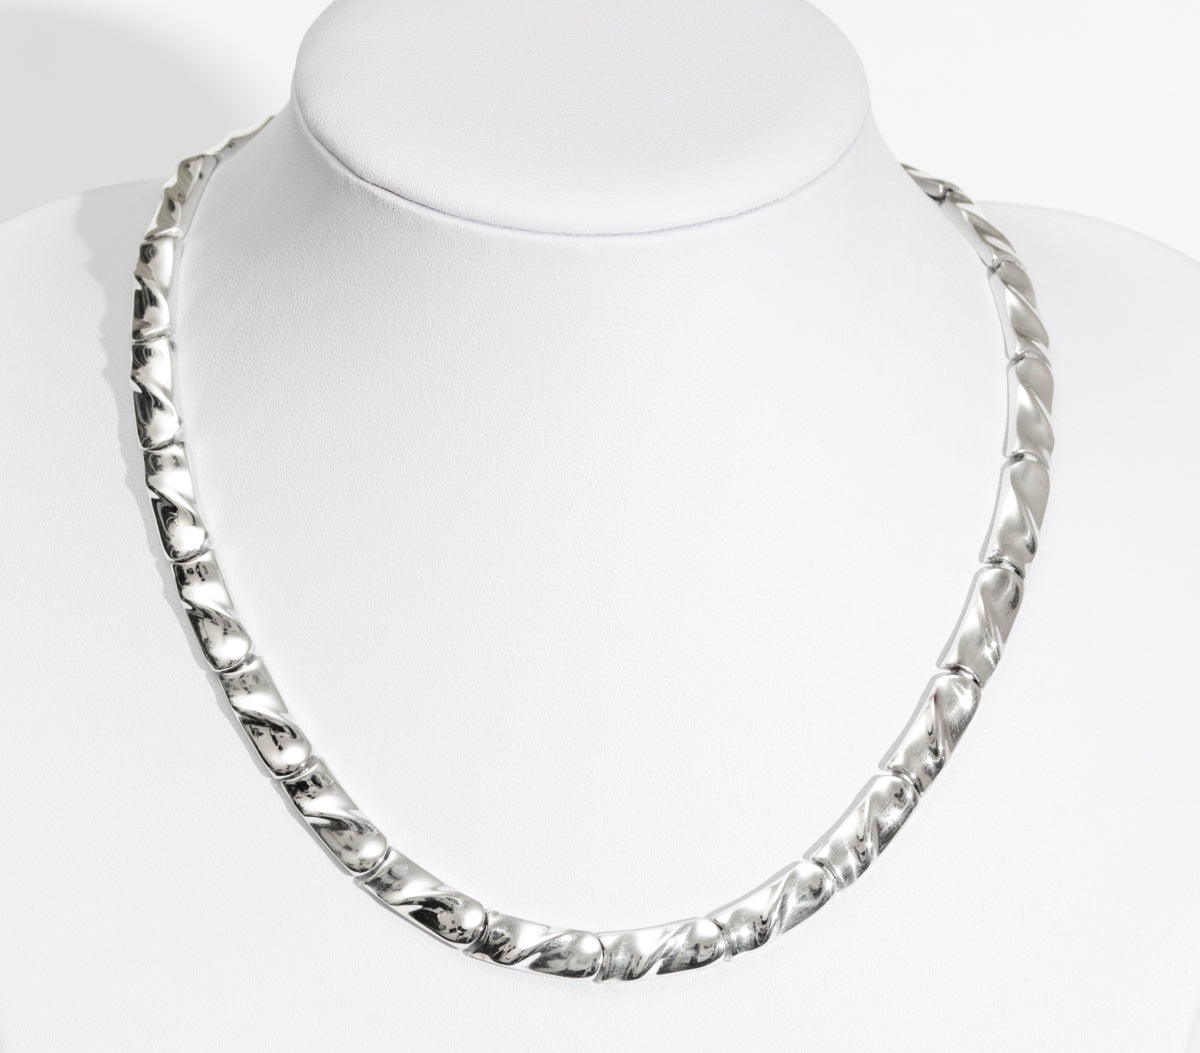 Vintage 1980's Chunky Textured Sterling Silver Necklace Collar/Choker Type (A1816)